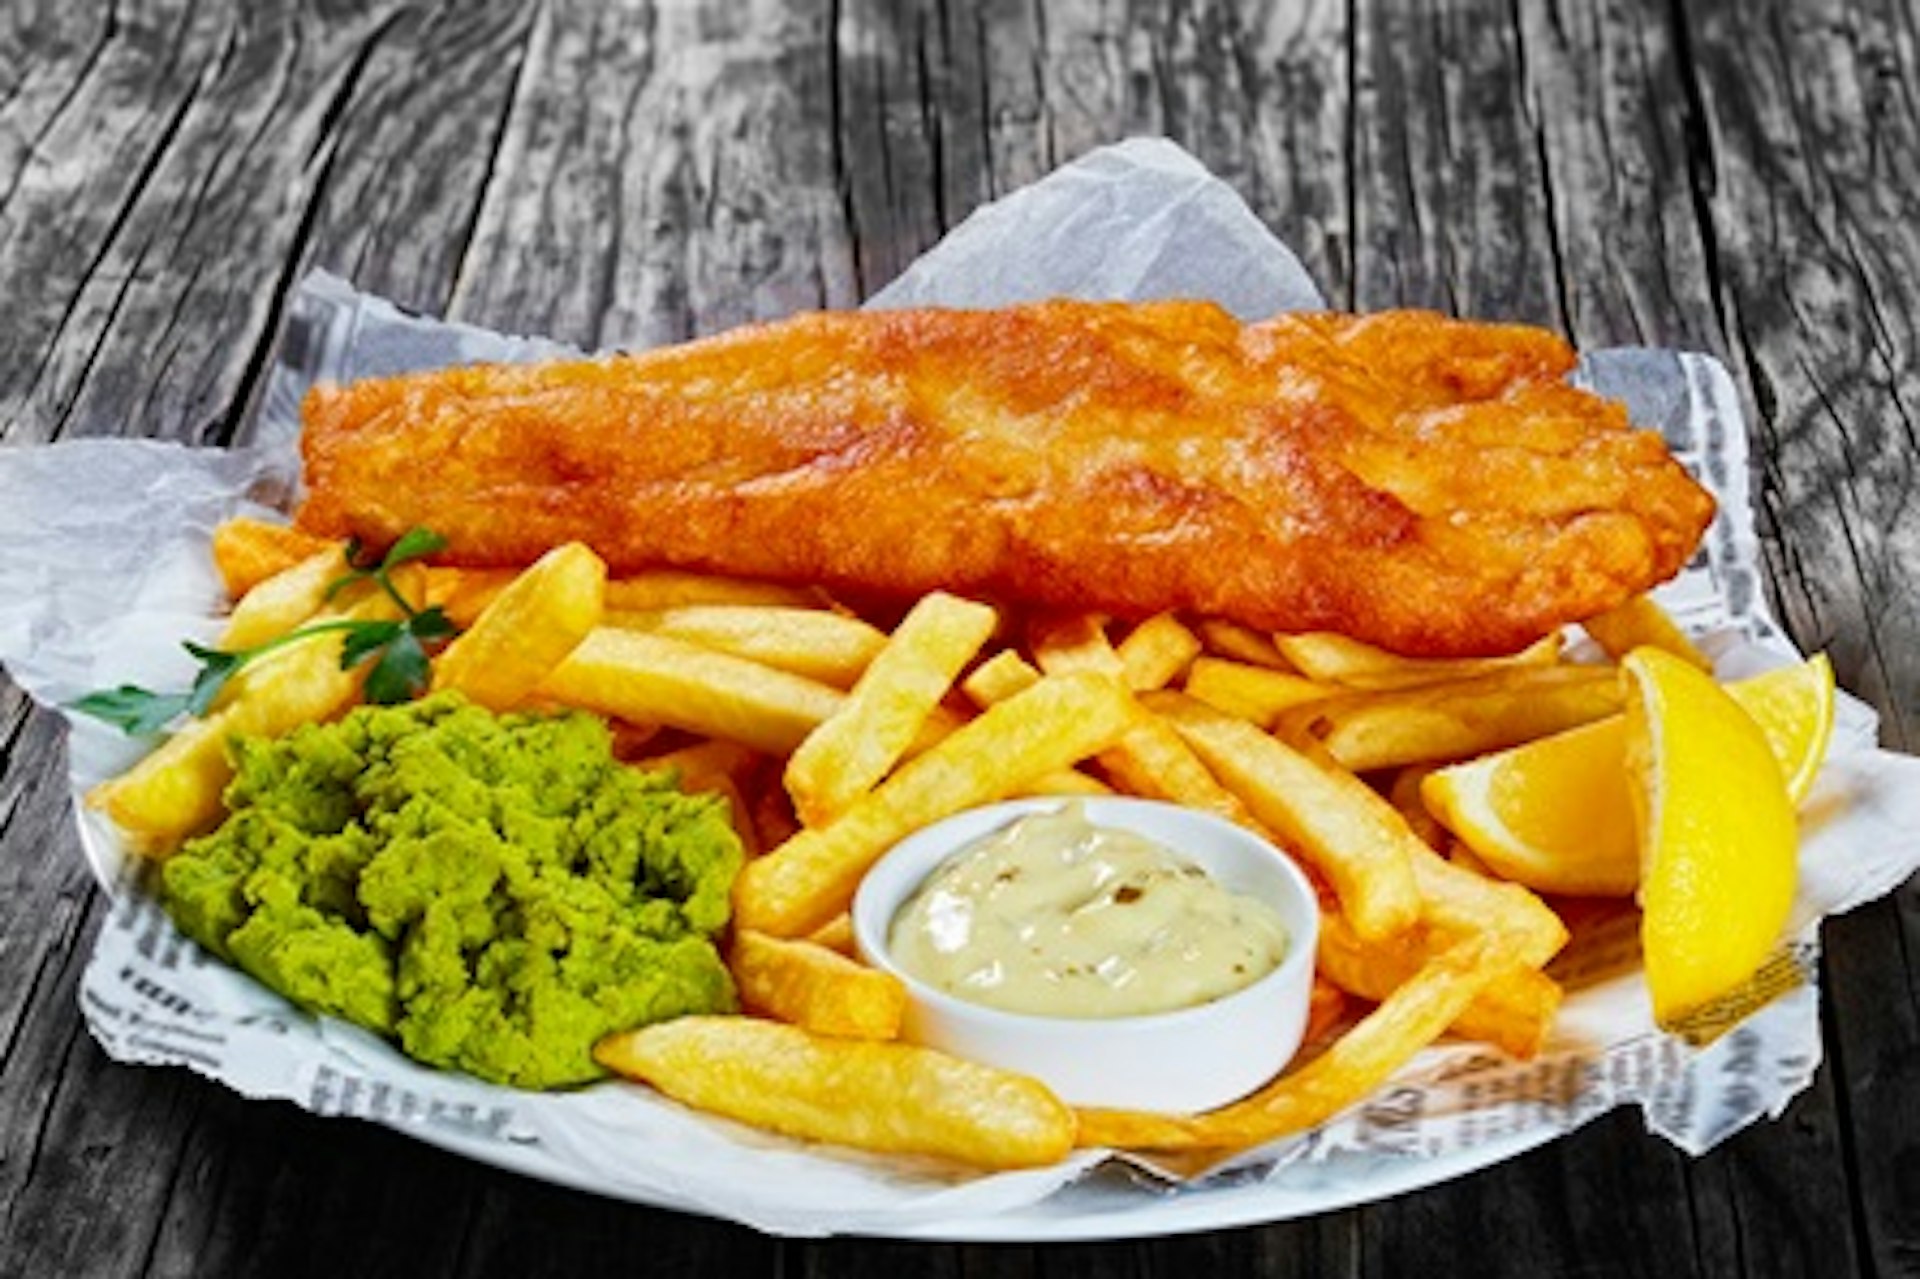 Jack the Ripper Walking Tour with Fish & Chip Supper for Two 3